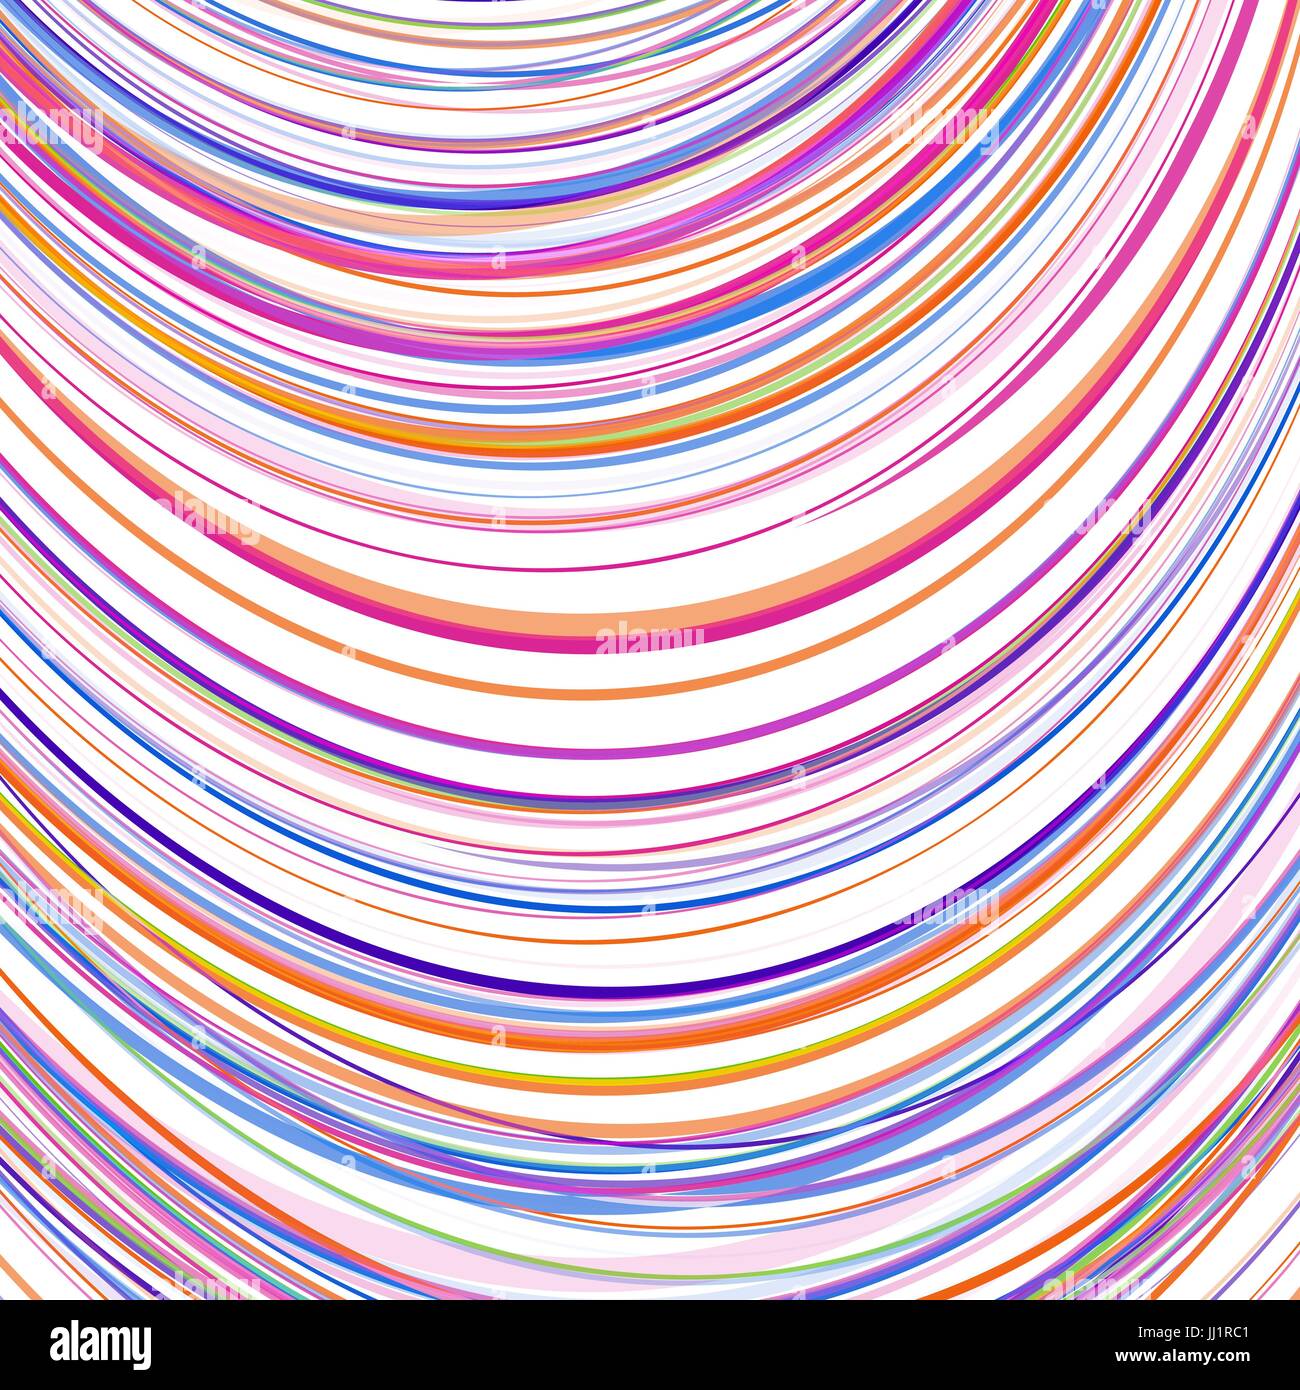 Amazing linear thread, abstract vector background template backdrop space design for posters, flyers, covers, presentations, business cards. Vector Il Stock Vector